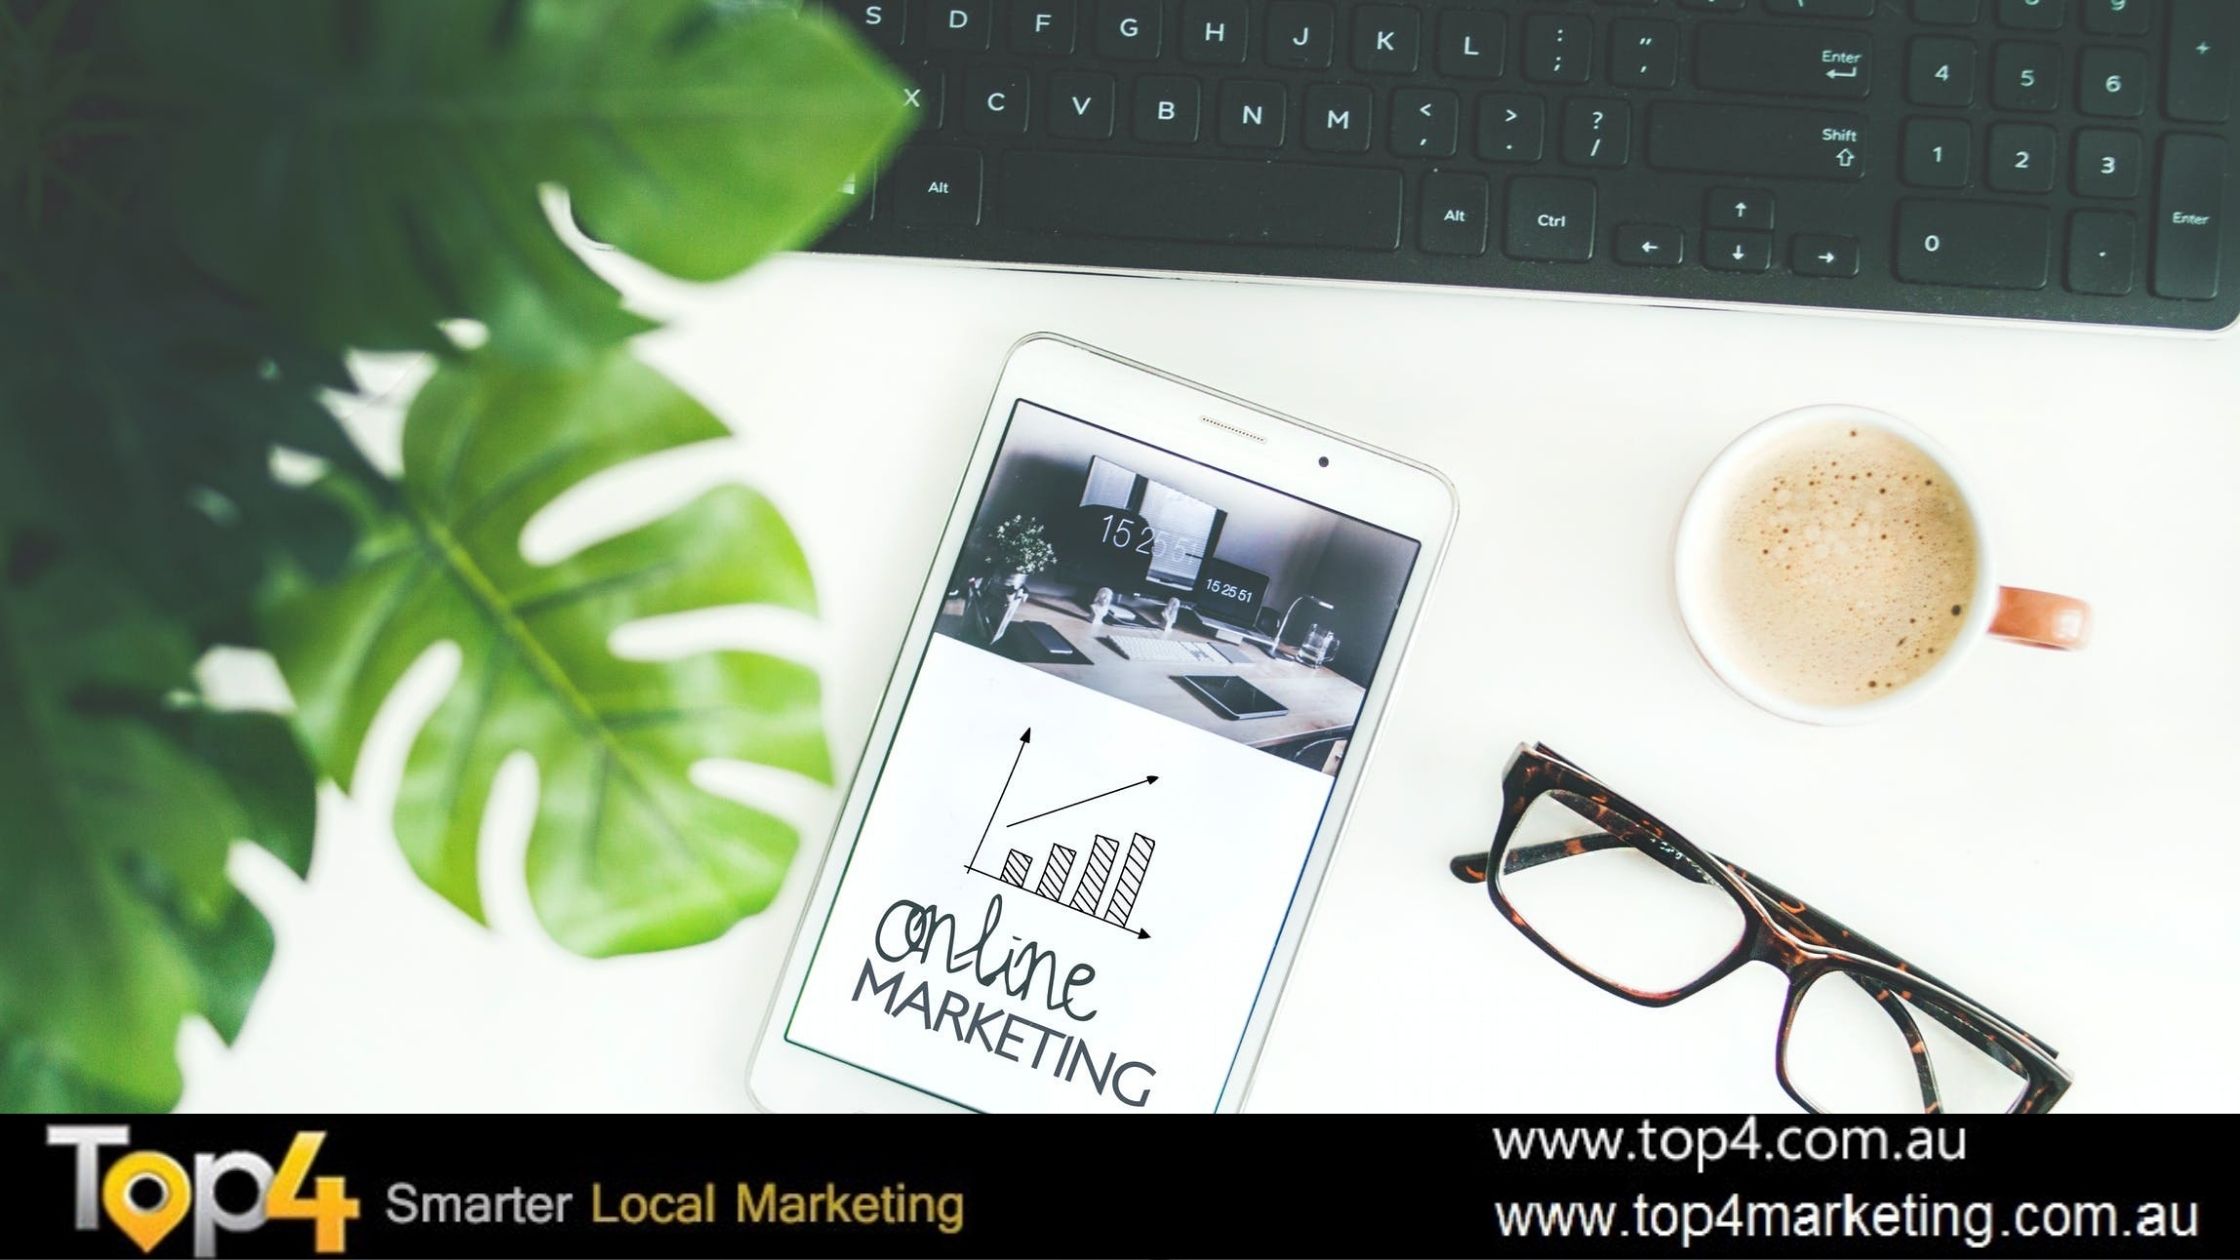 Digital Marketing Strategy for Small Businesses - Top4 Marketing